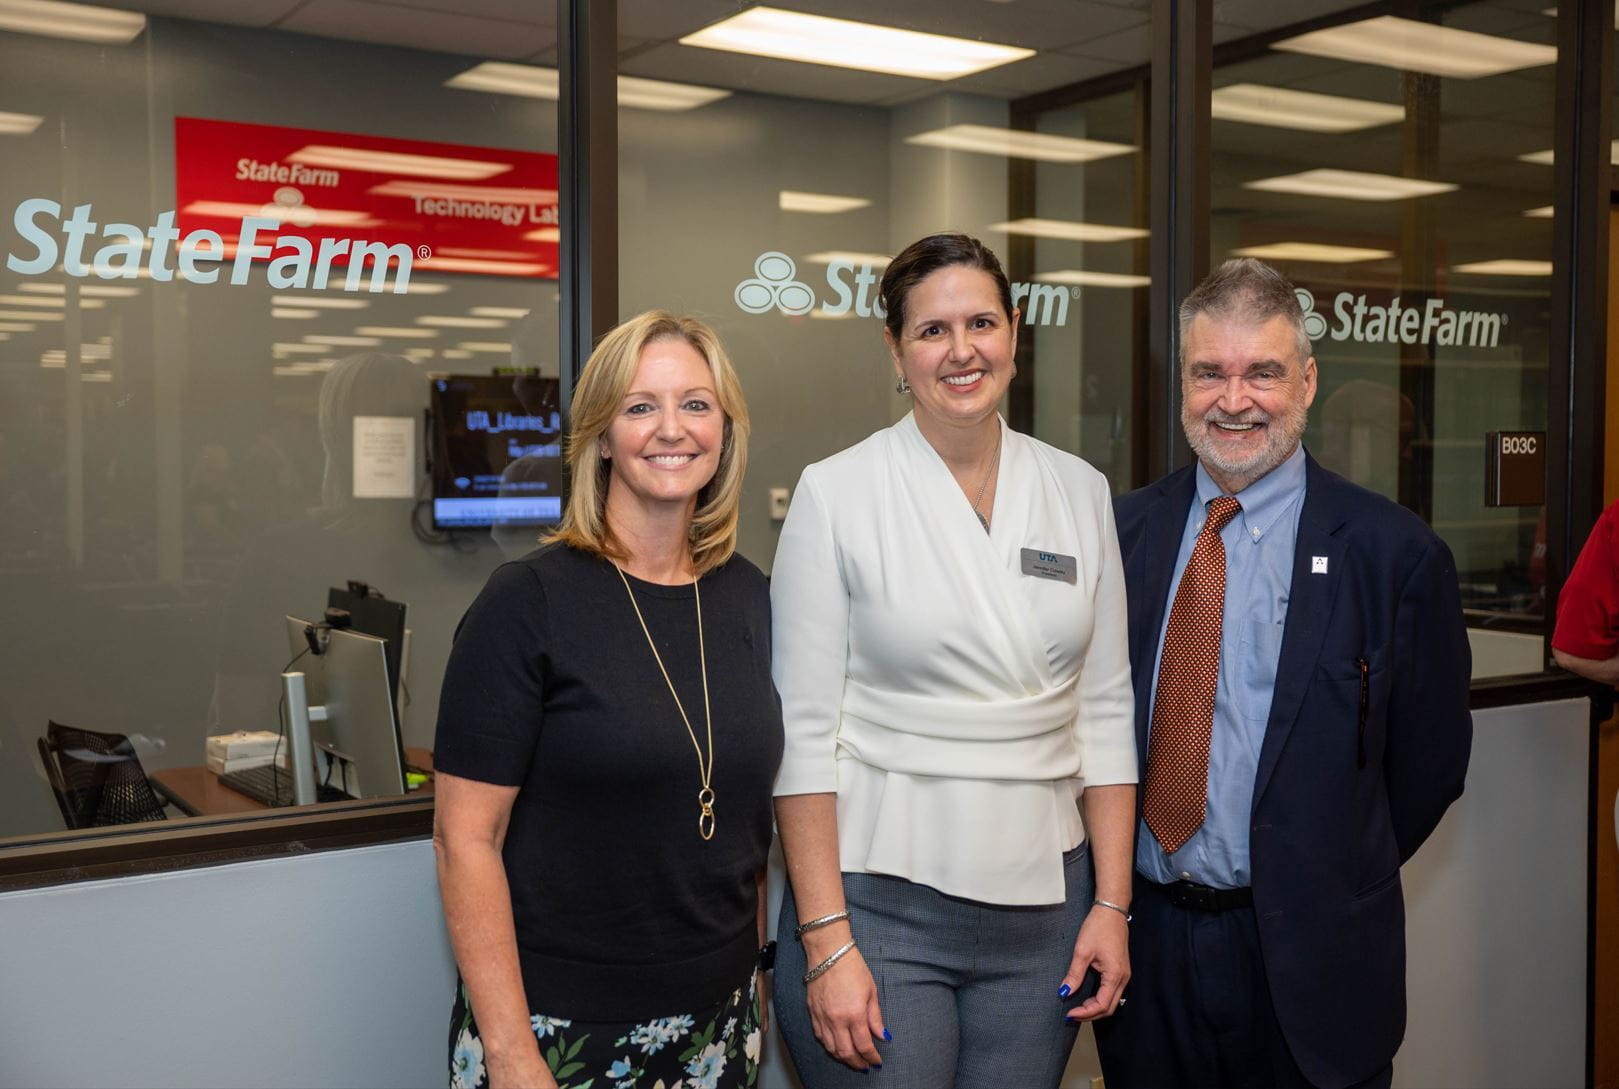 State Farm continues support of UTA with tech lab internships – News Center